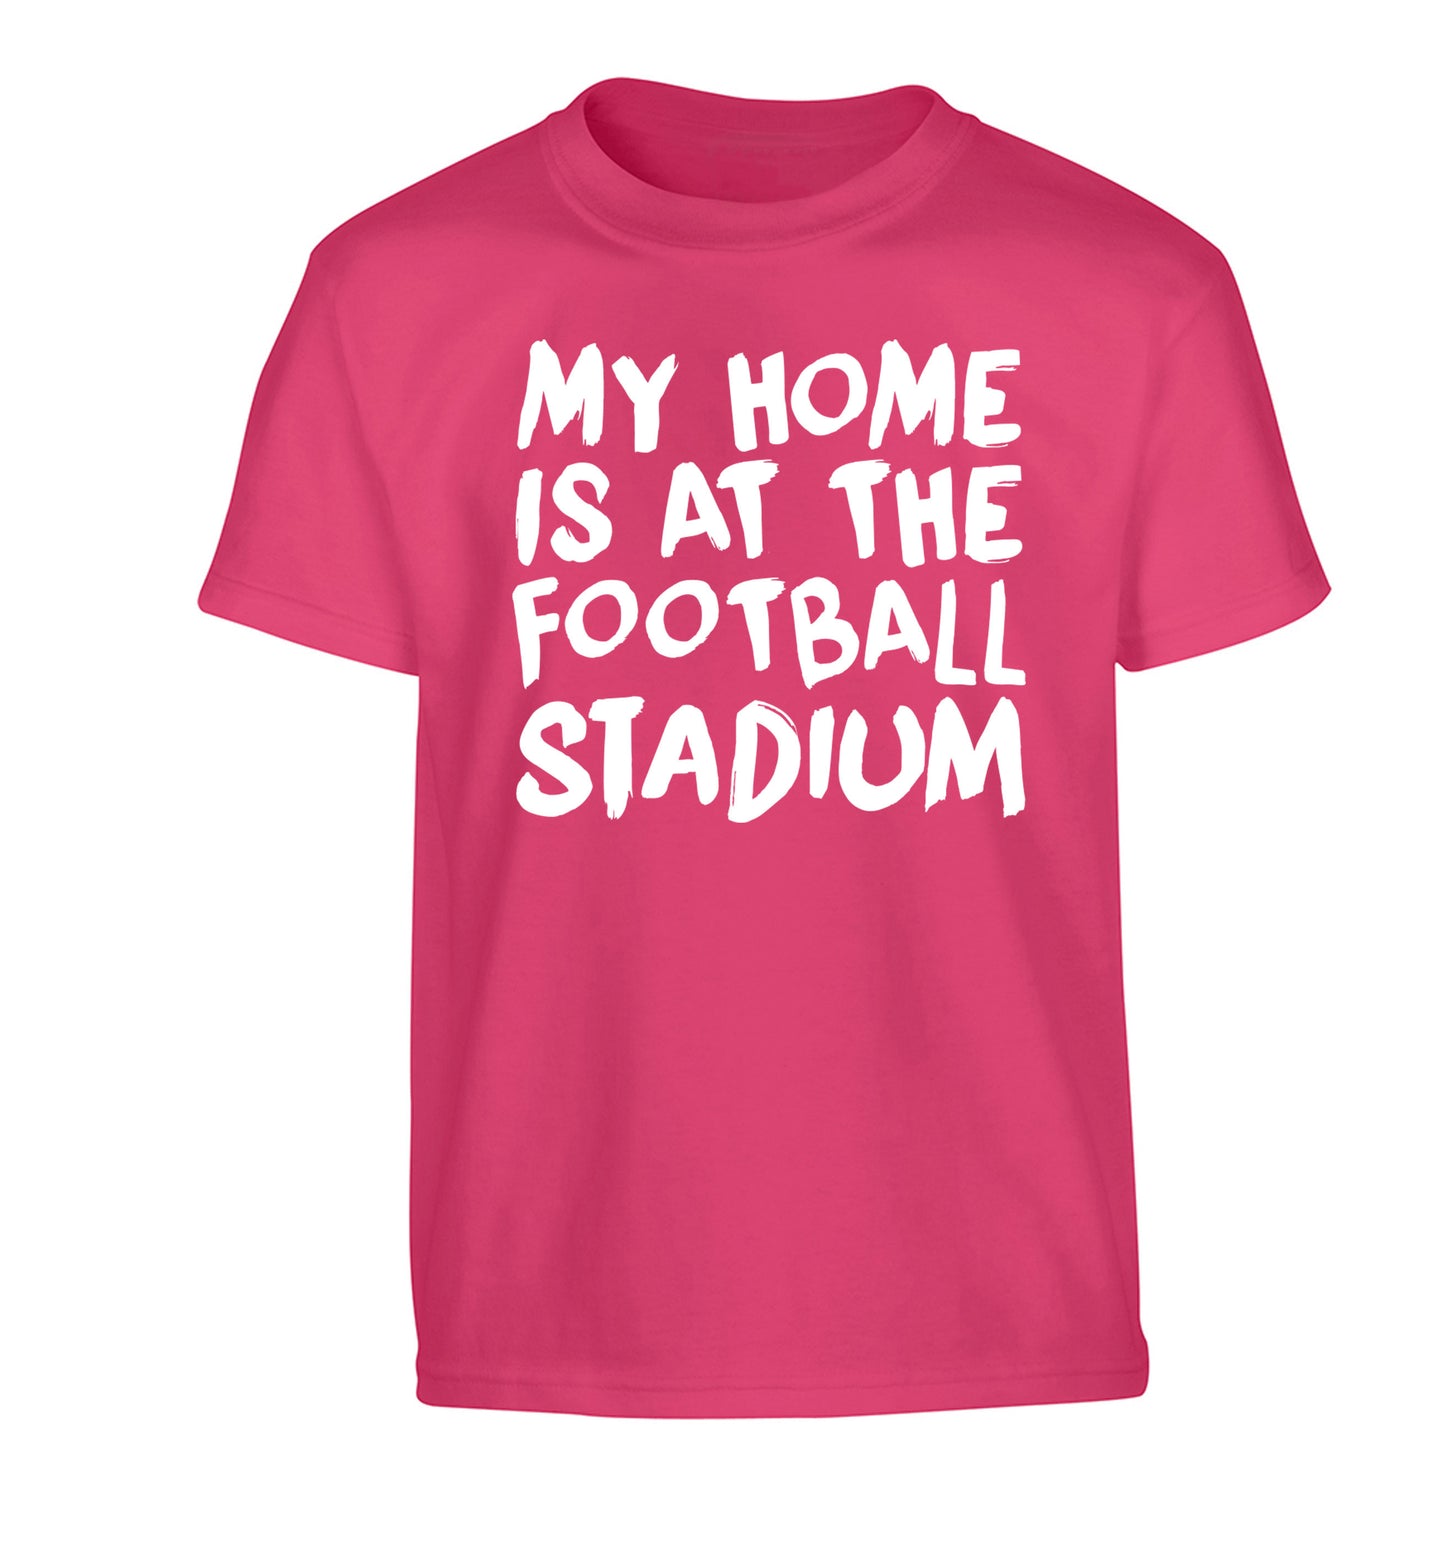 My home is at the football stadium Children's pink Tshirt 12-14 Years